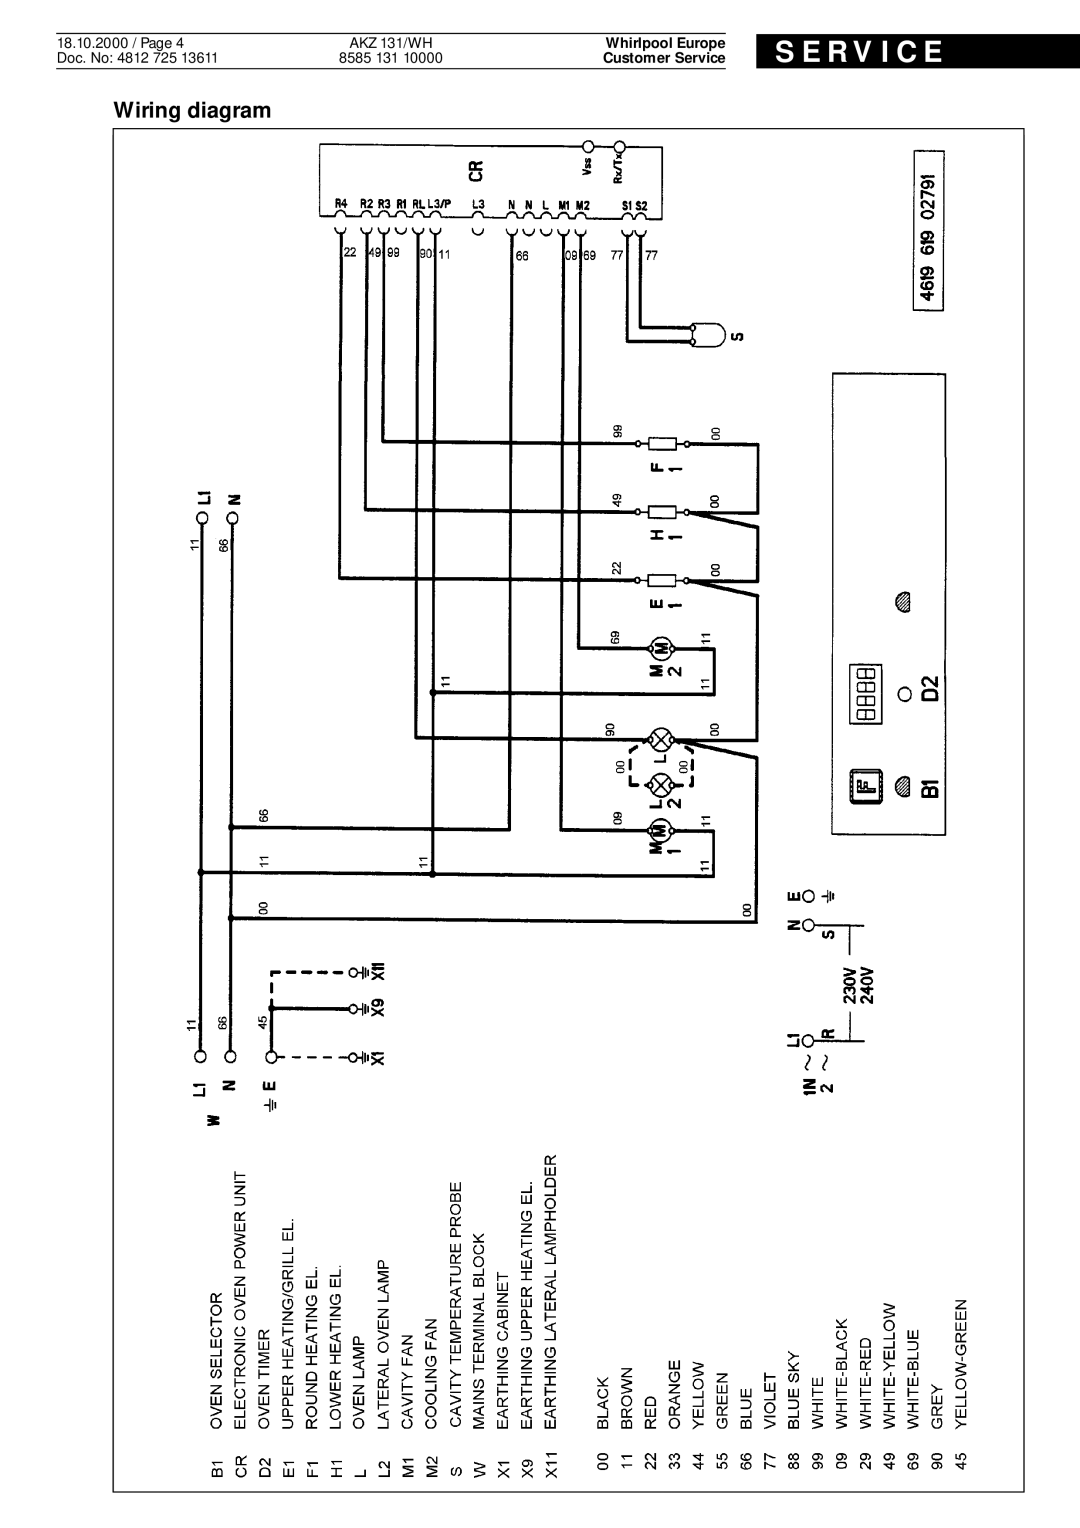 Whirlpool AKZ 131 WH Wiring diagram, S E R V I C E, 18.10.2000 / Page, AKZ 131/WH, Doc. No, 8585, Whirlpool Europe 